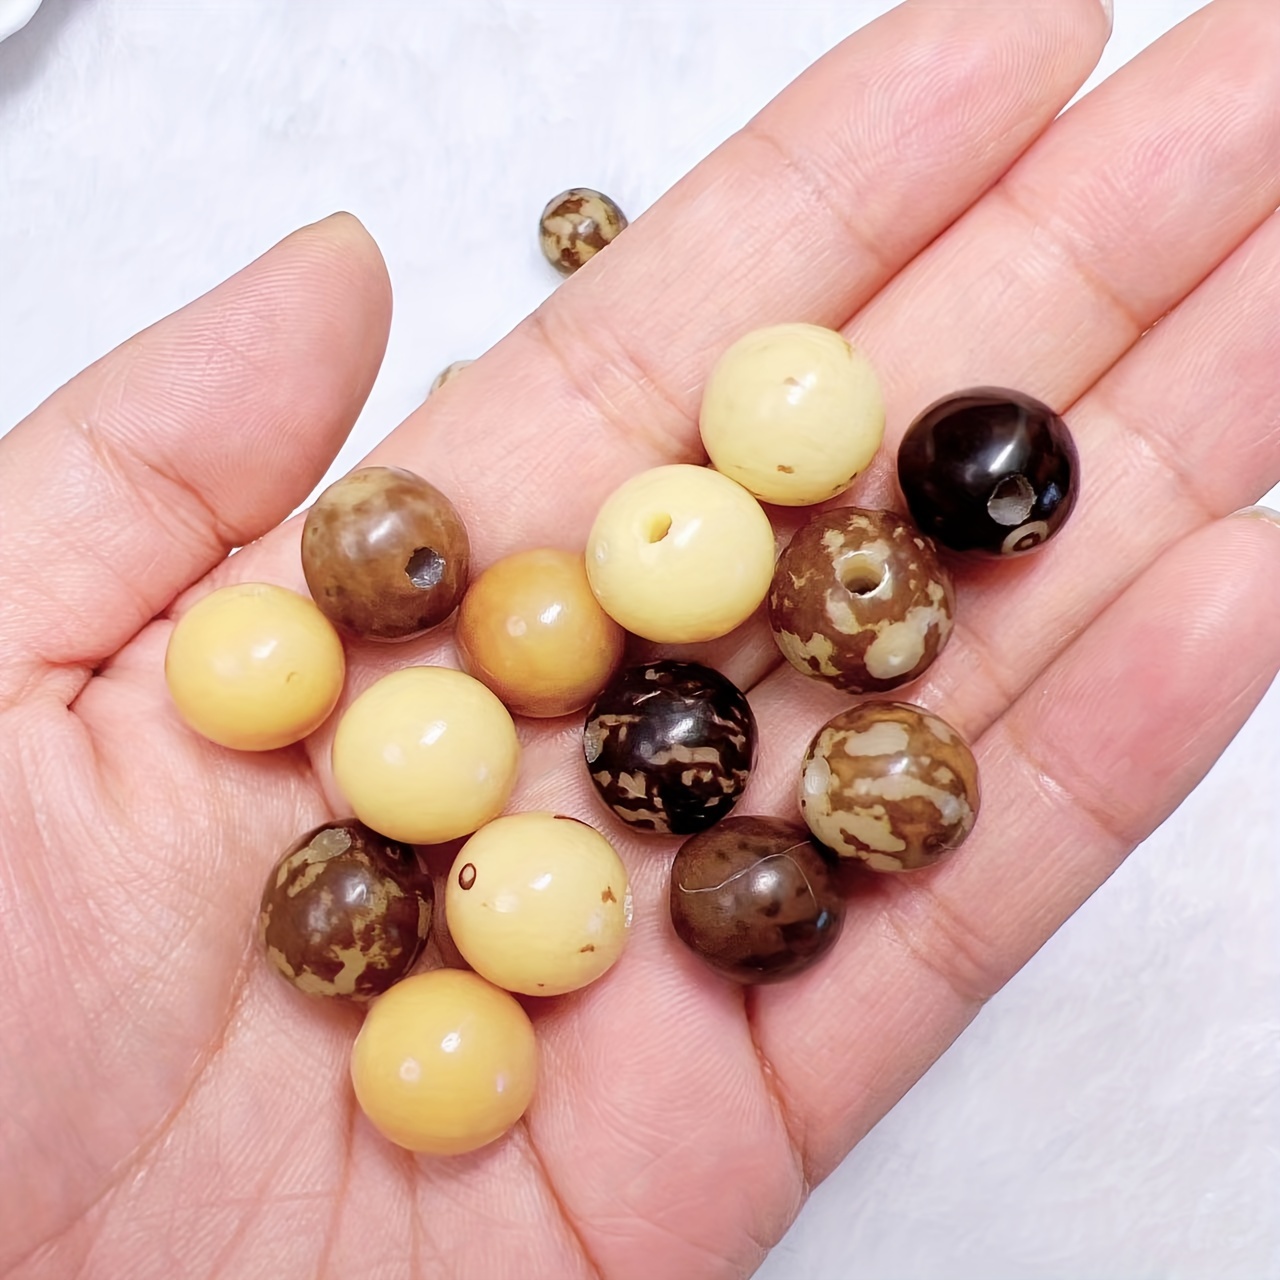 6mm(0.236inch)-12mm(0.472inch) Black Agates Mantra Prayer Stone Beads Round  Loose Beads For Jewelry Making DIY Bracelet Necklace Handmade Accessories